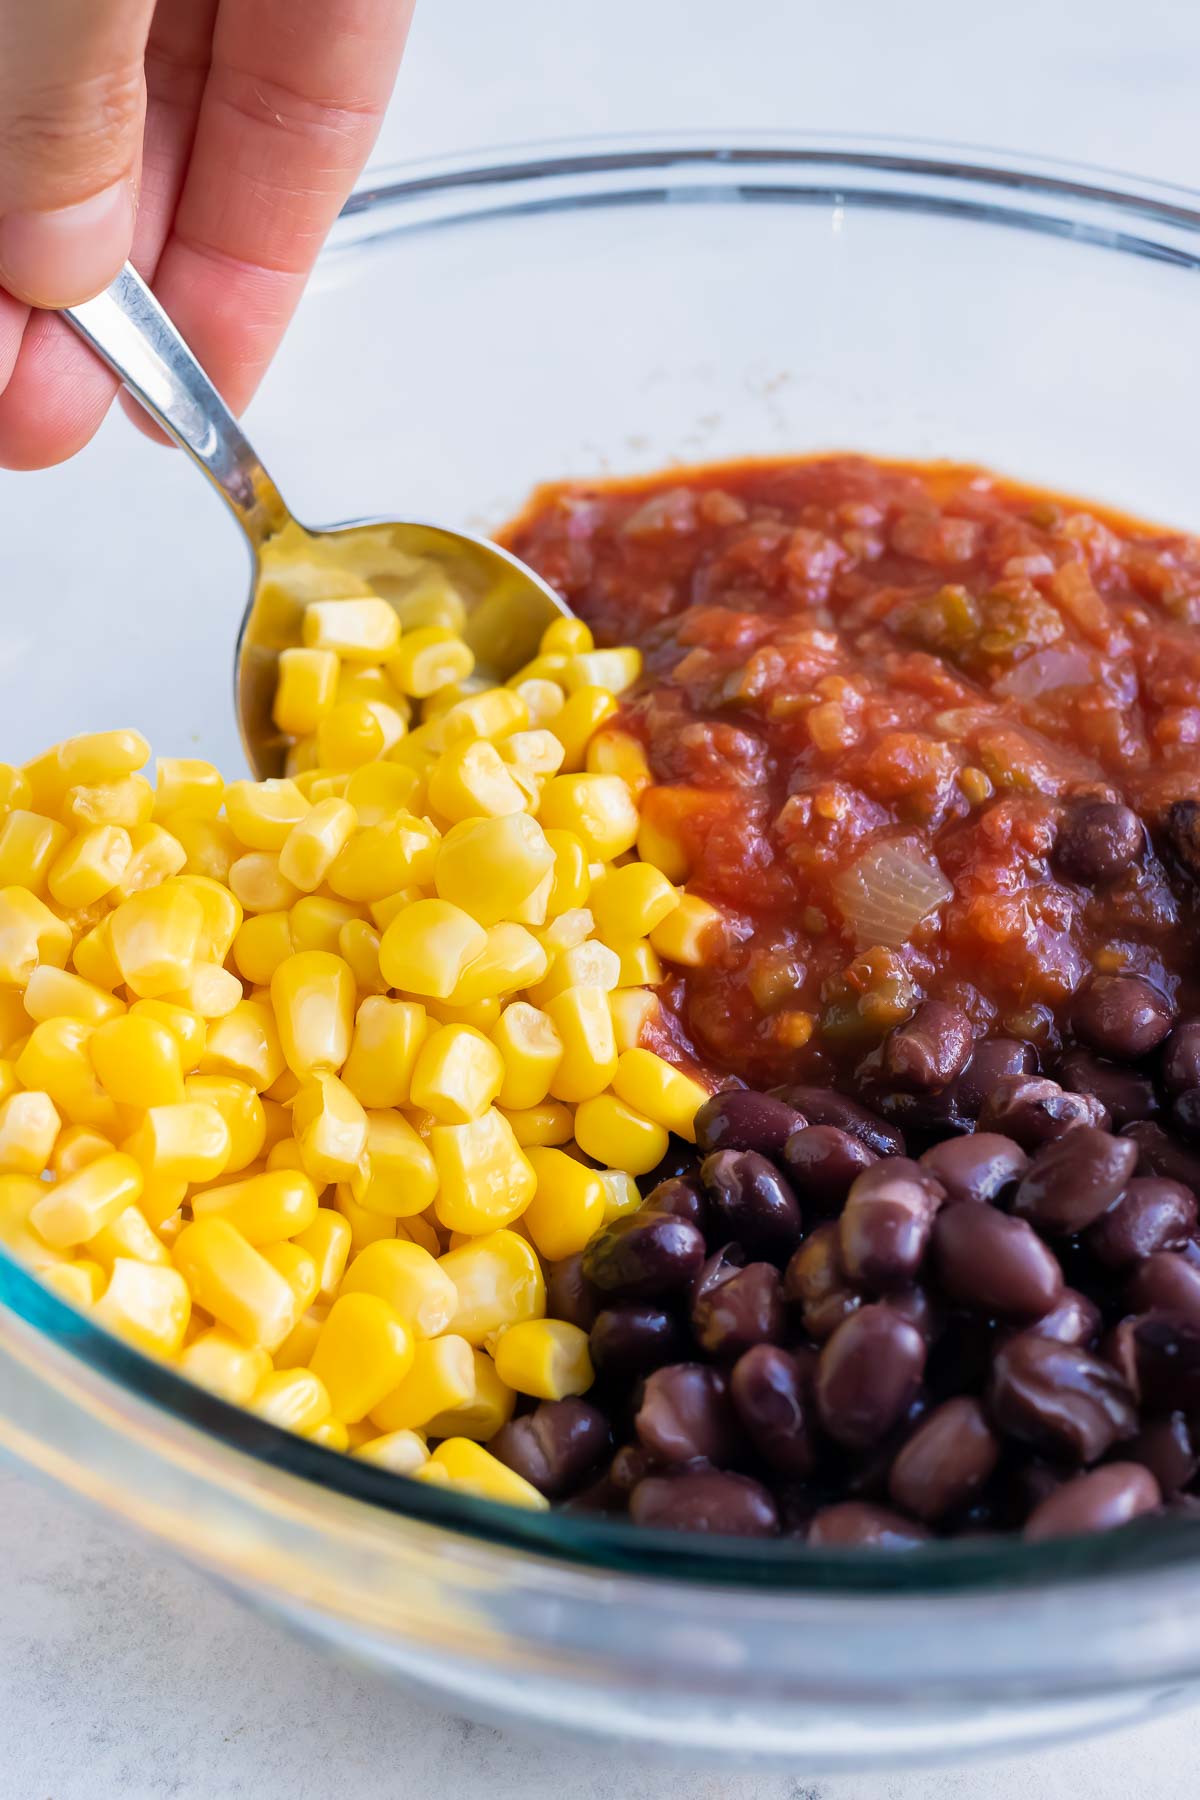 Canned corn, beans, and salsa are mixed together in a bowl.